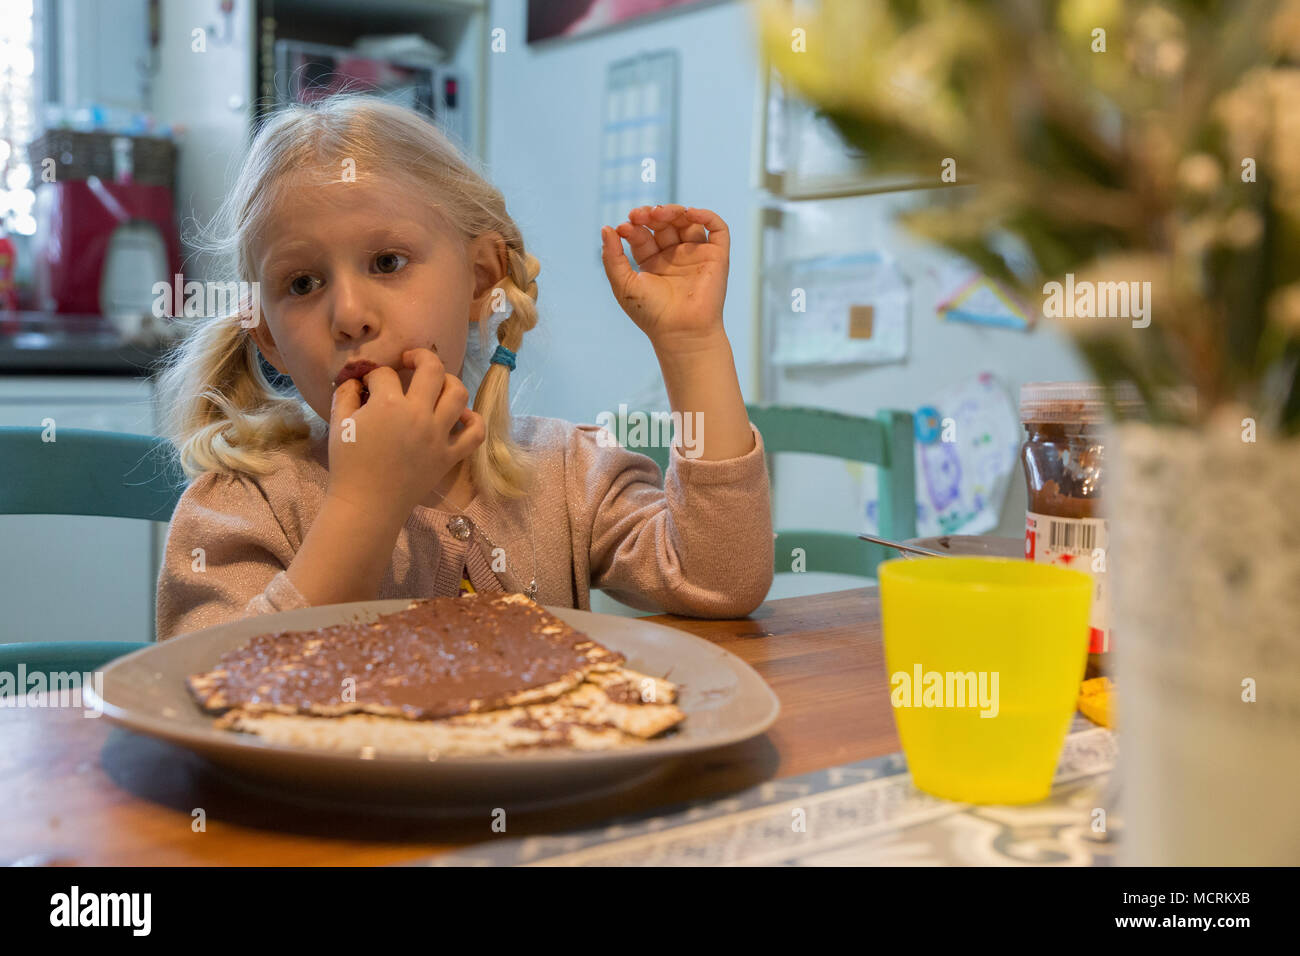 Portrait of a young girl of five eats Matzo with chocolate spread during Passover Model release available Stock Photo